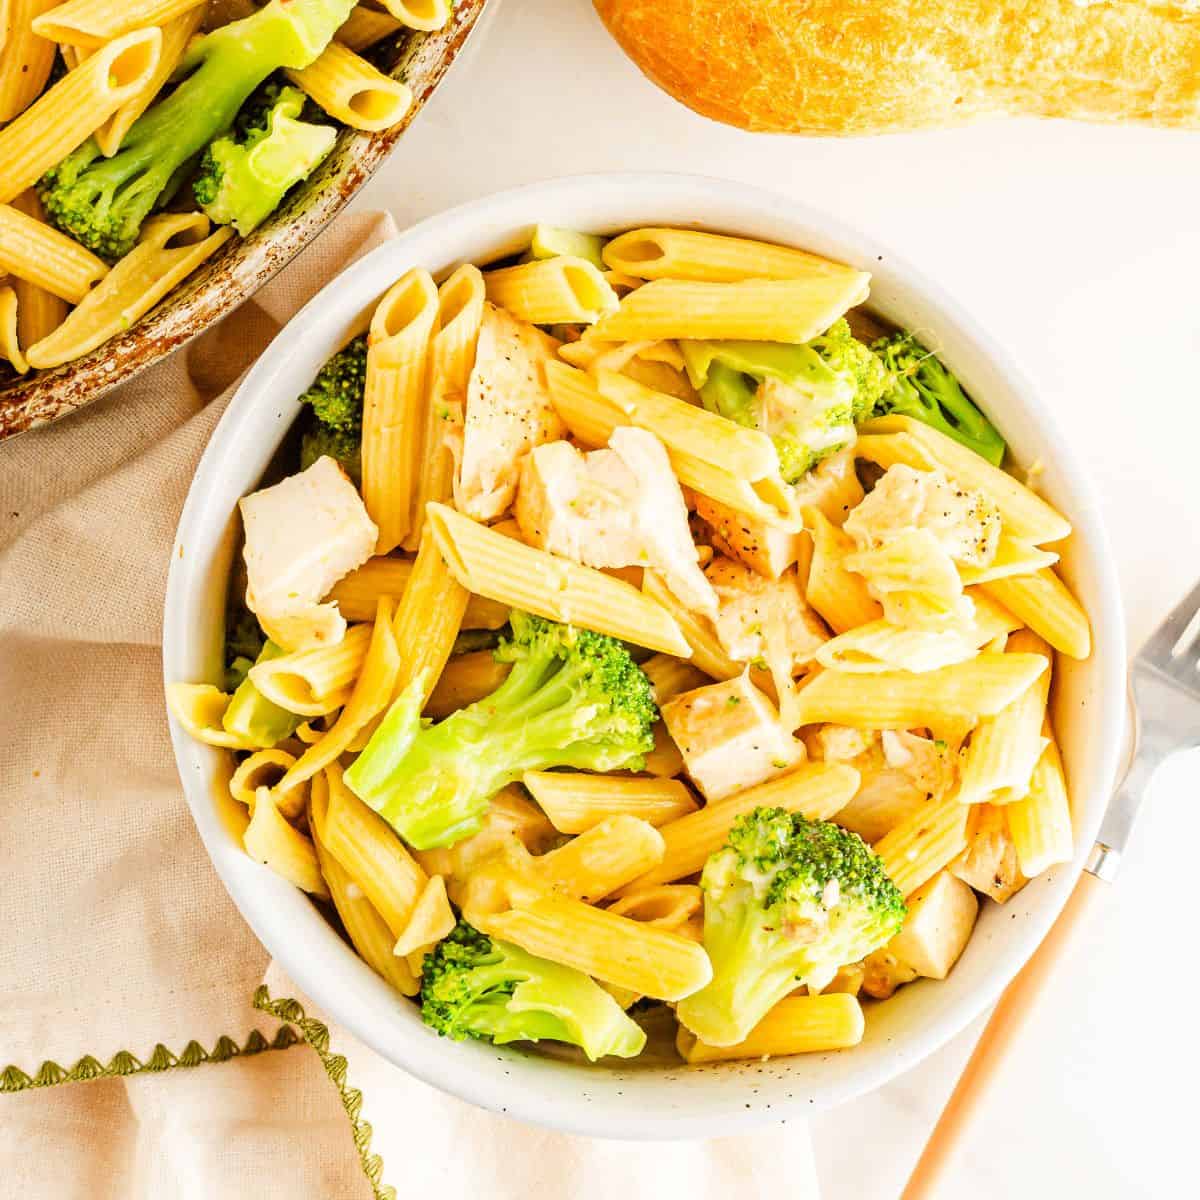 A bowl of Penne pasta with chicken and broccoli.